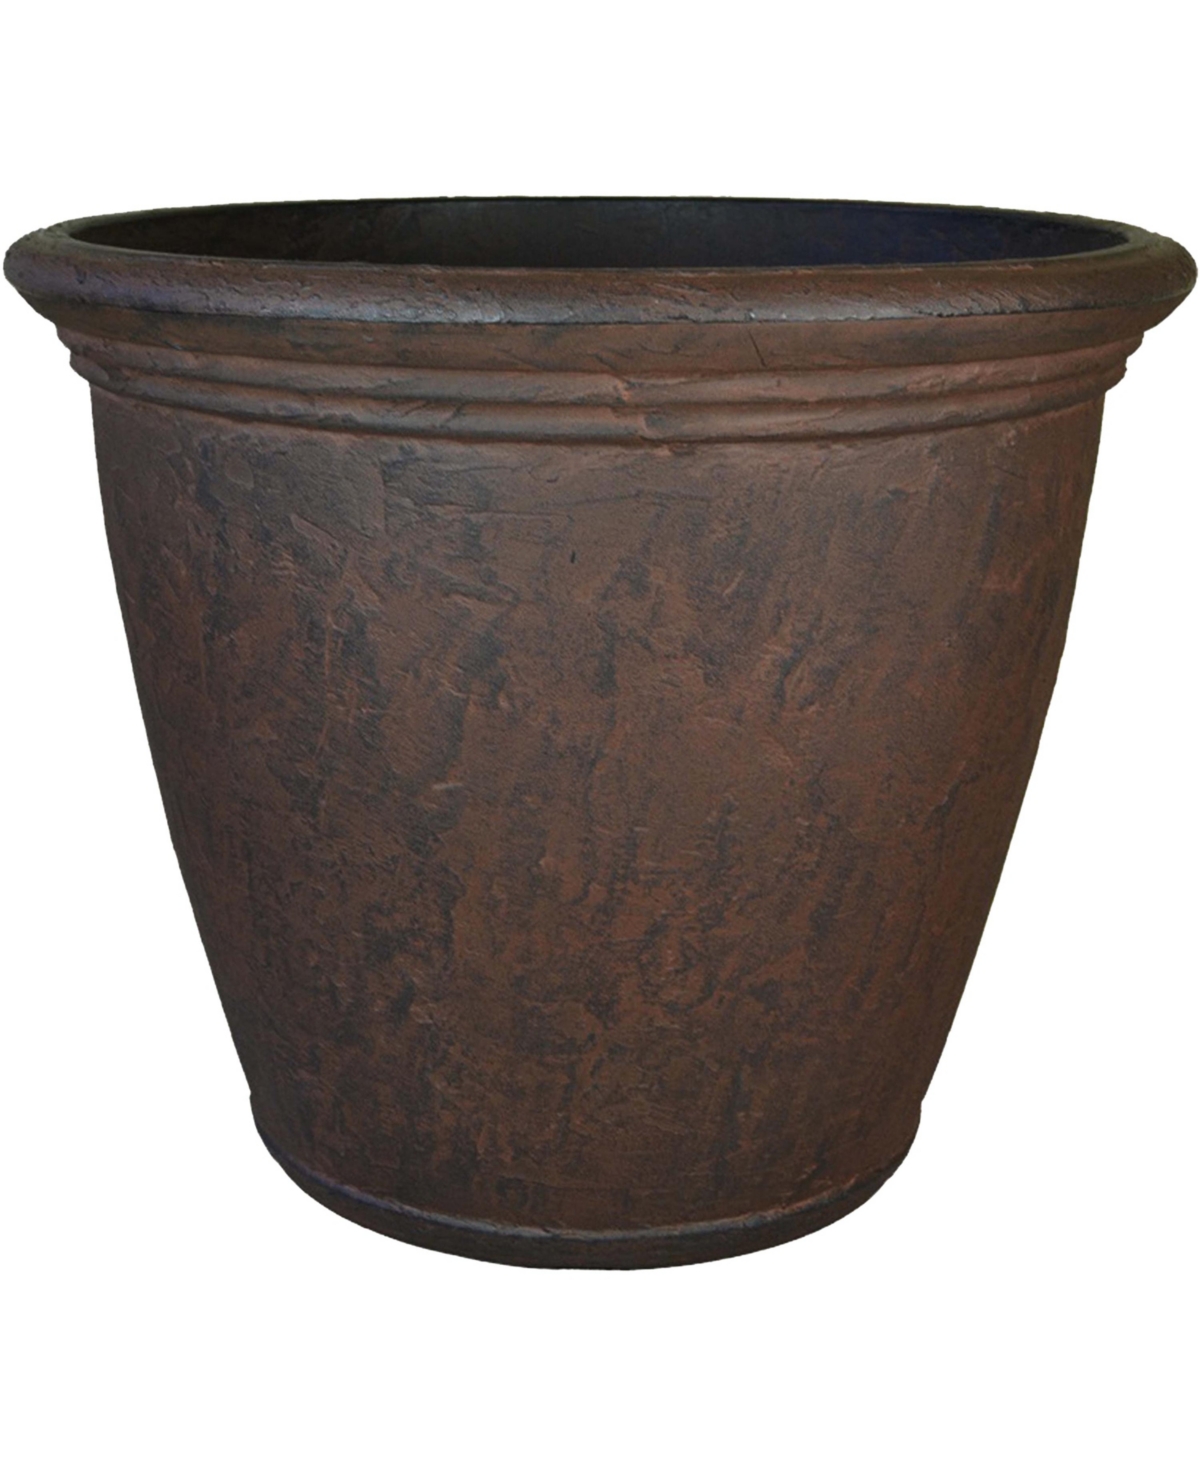 24 in Anjelica Polyresin Planter with Uv-Resistance - Rust - Dark brown